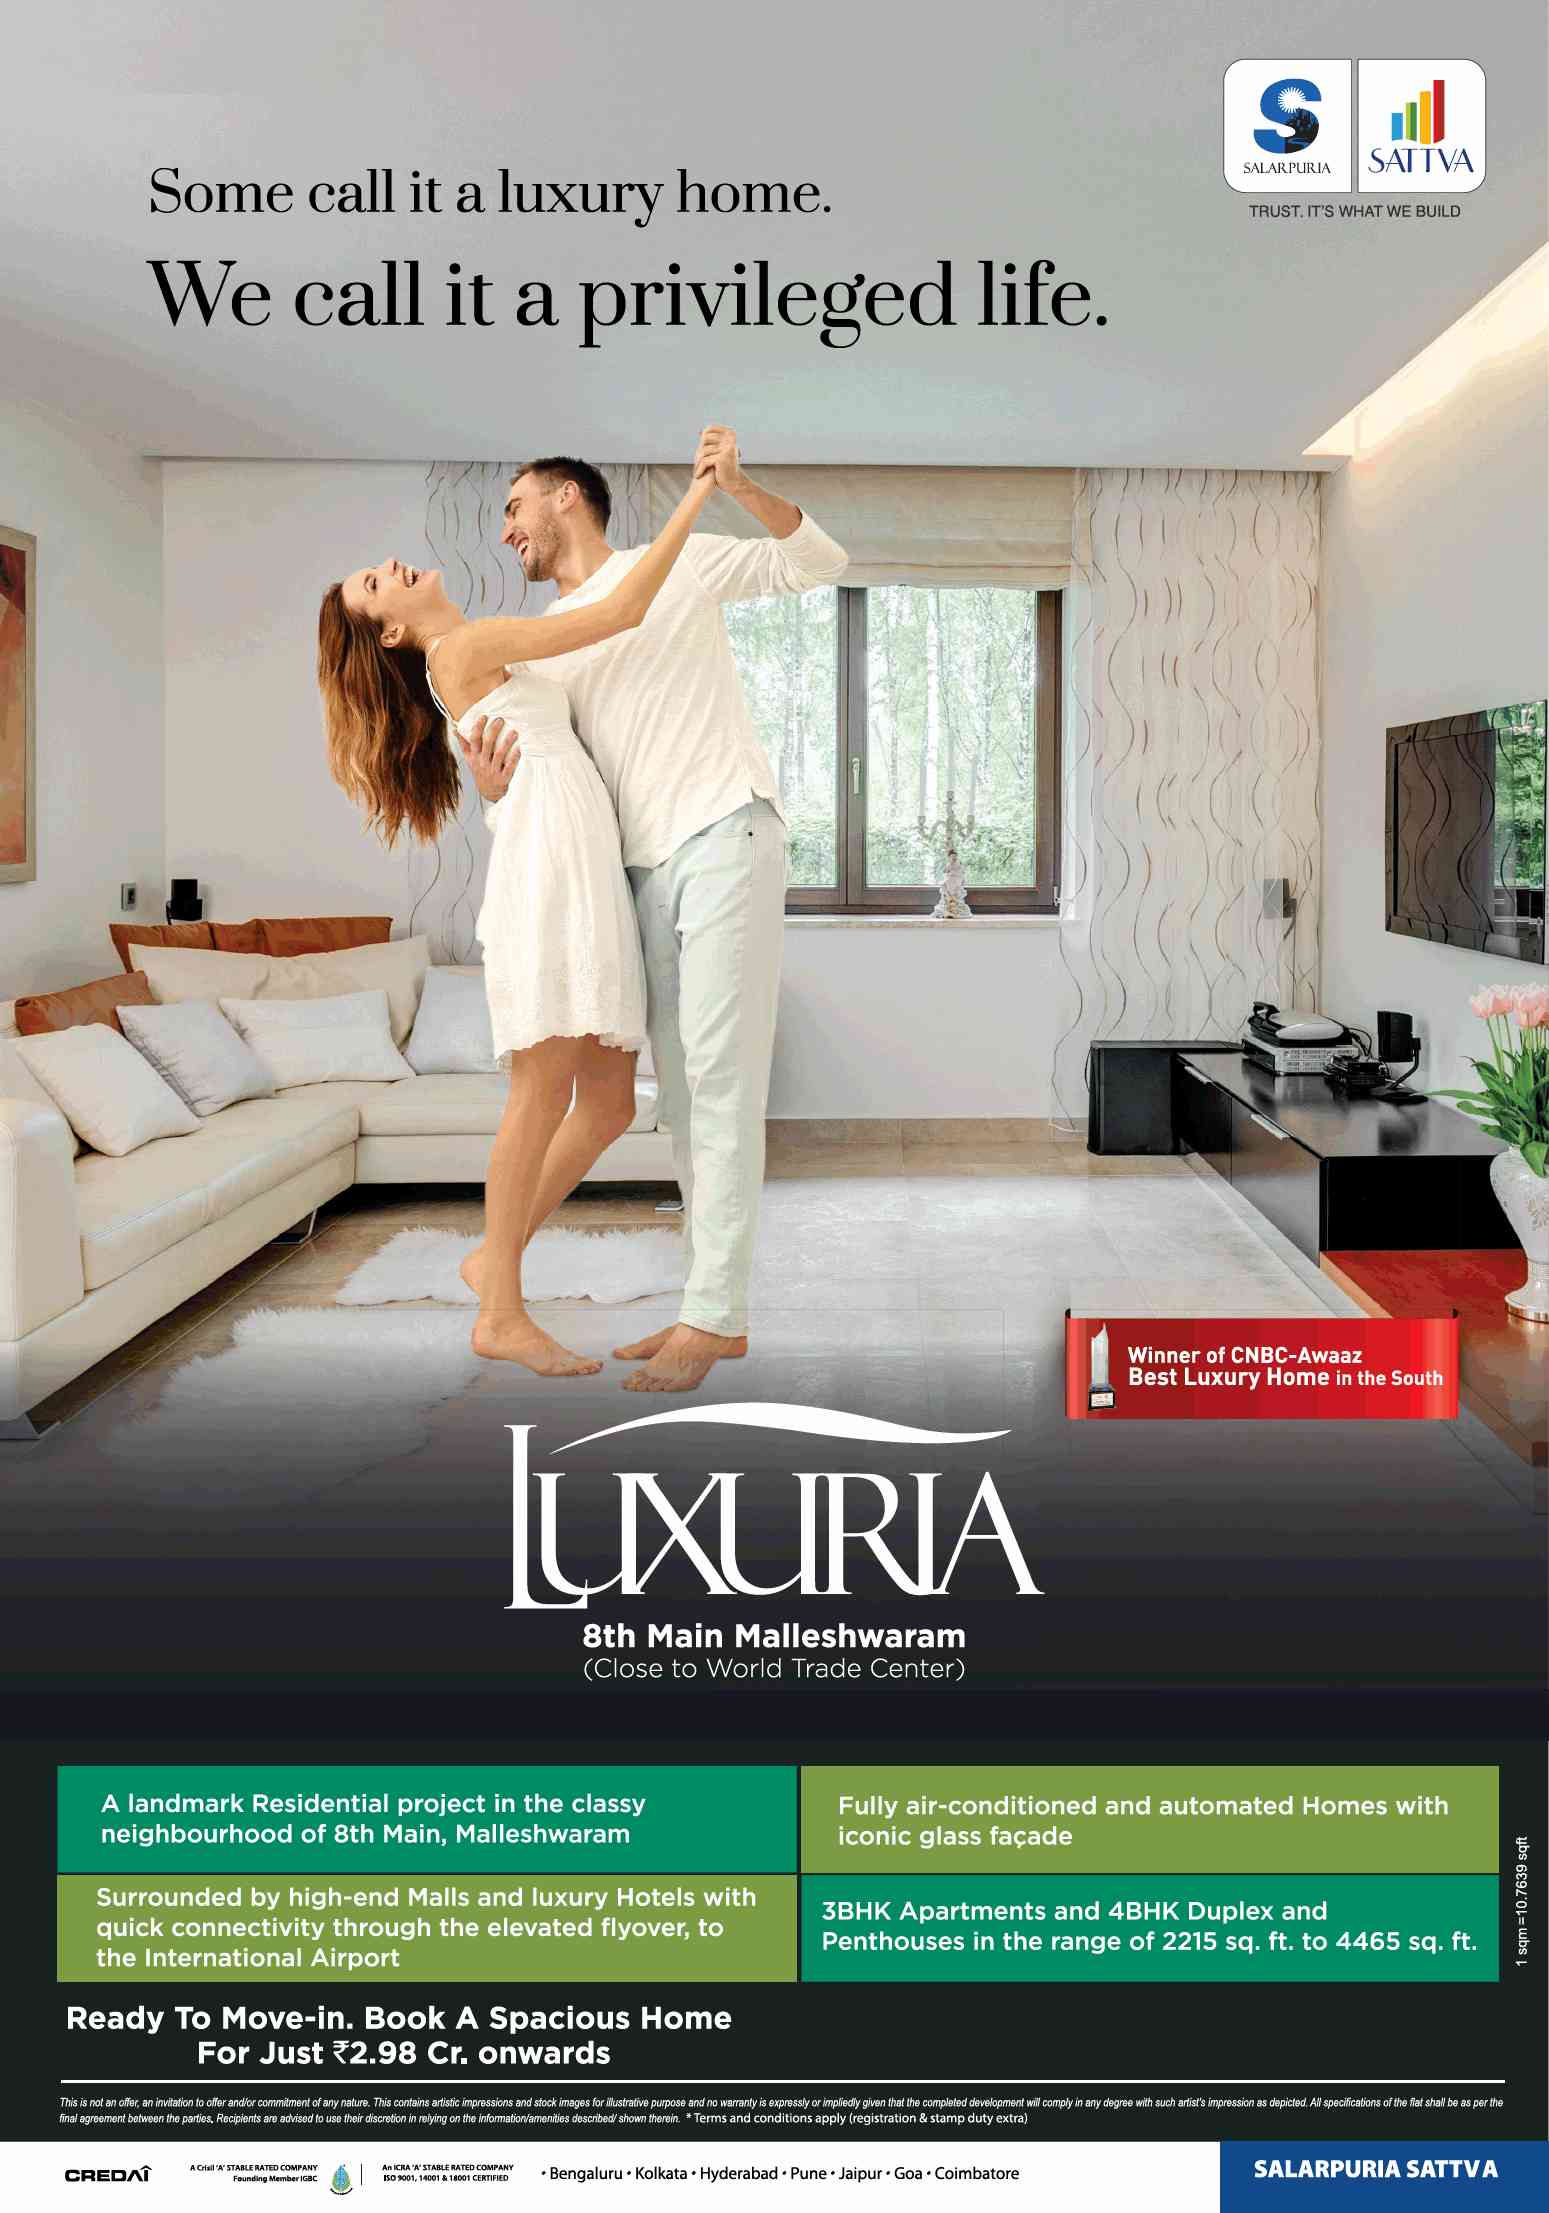 Book ready to move homes at Rs 2.98 cr at Salarpuria Sattva Luxuria in Bangalore